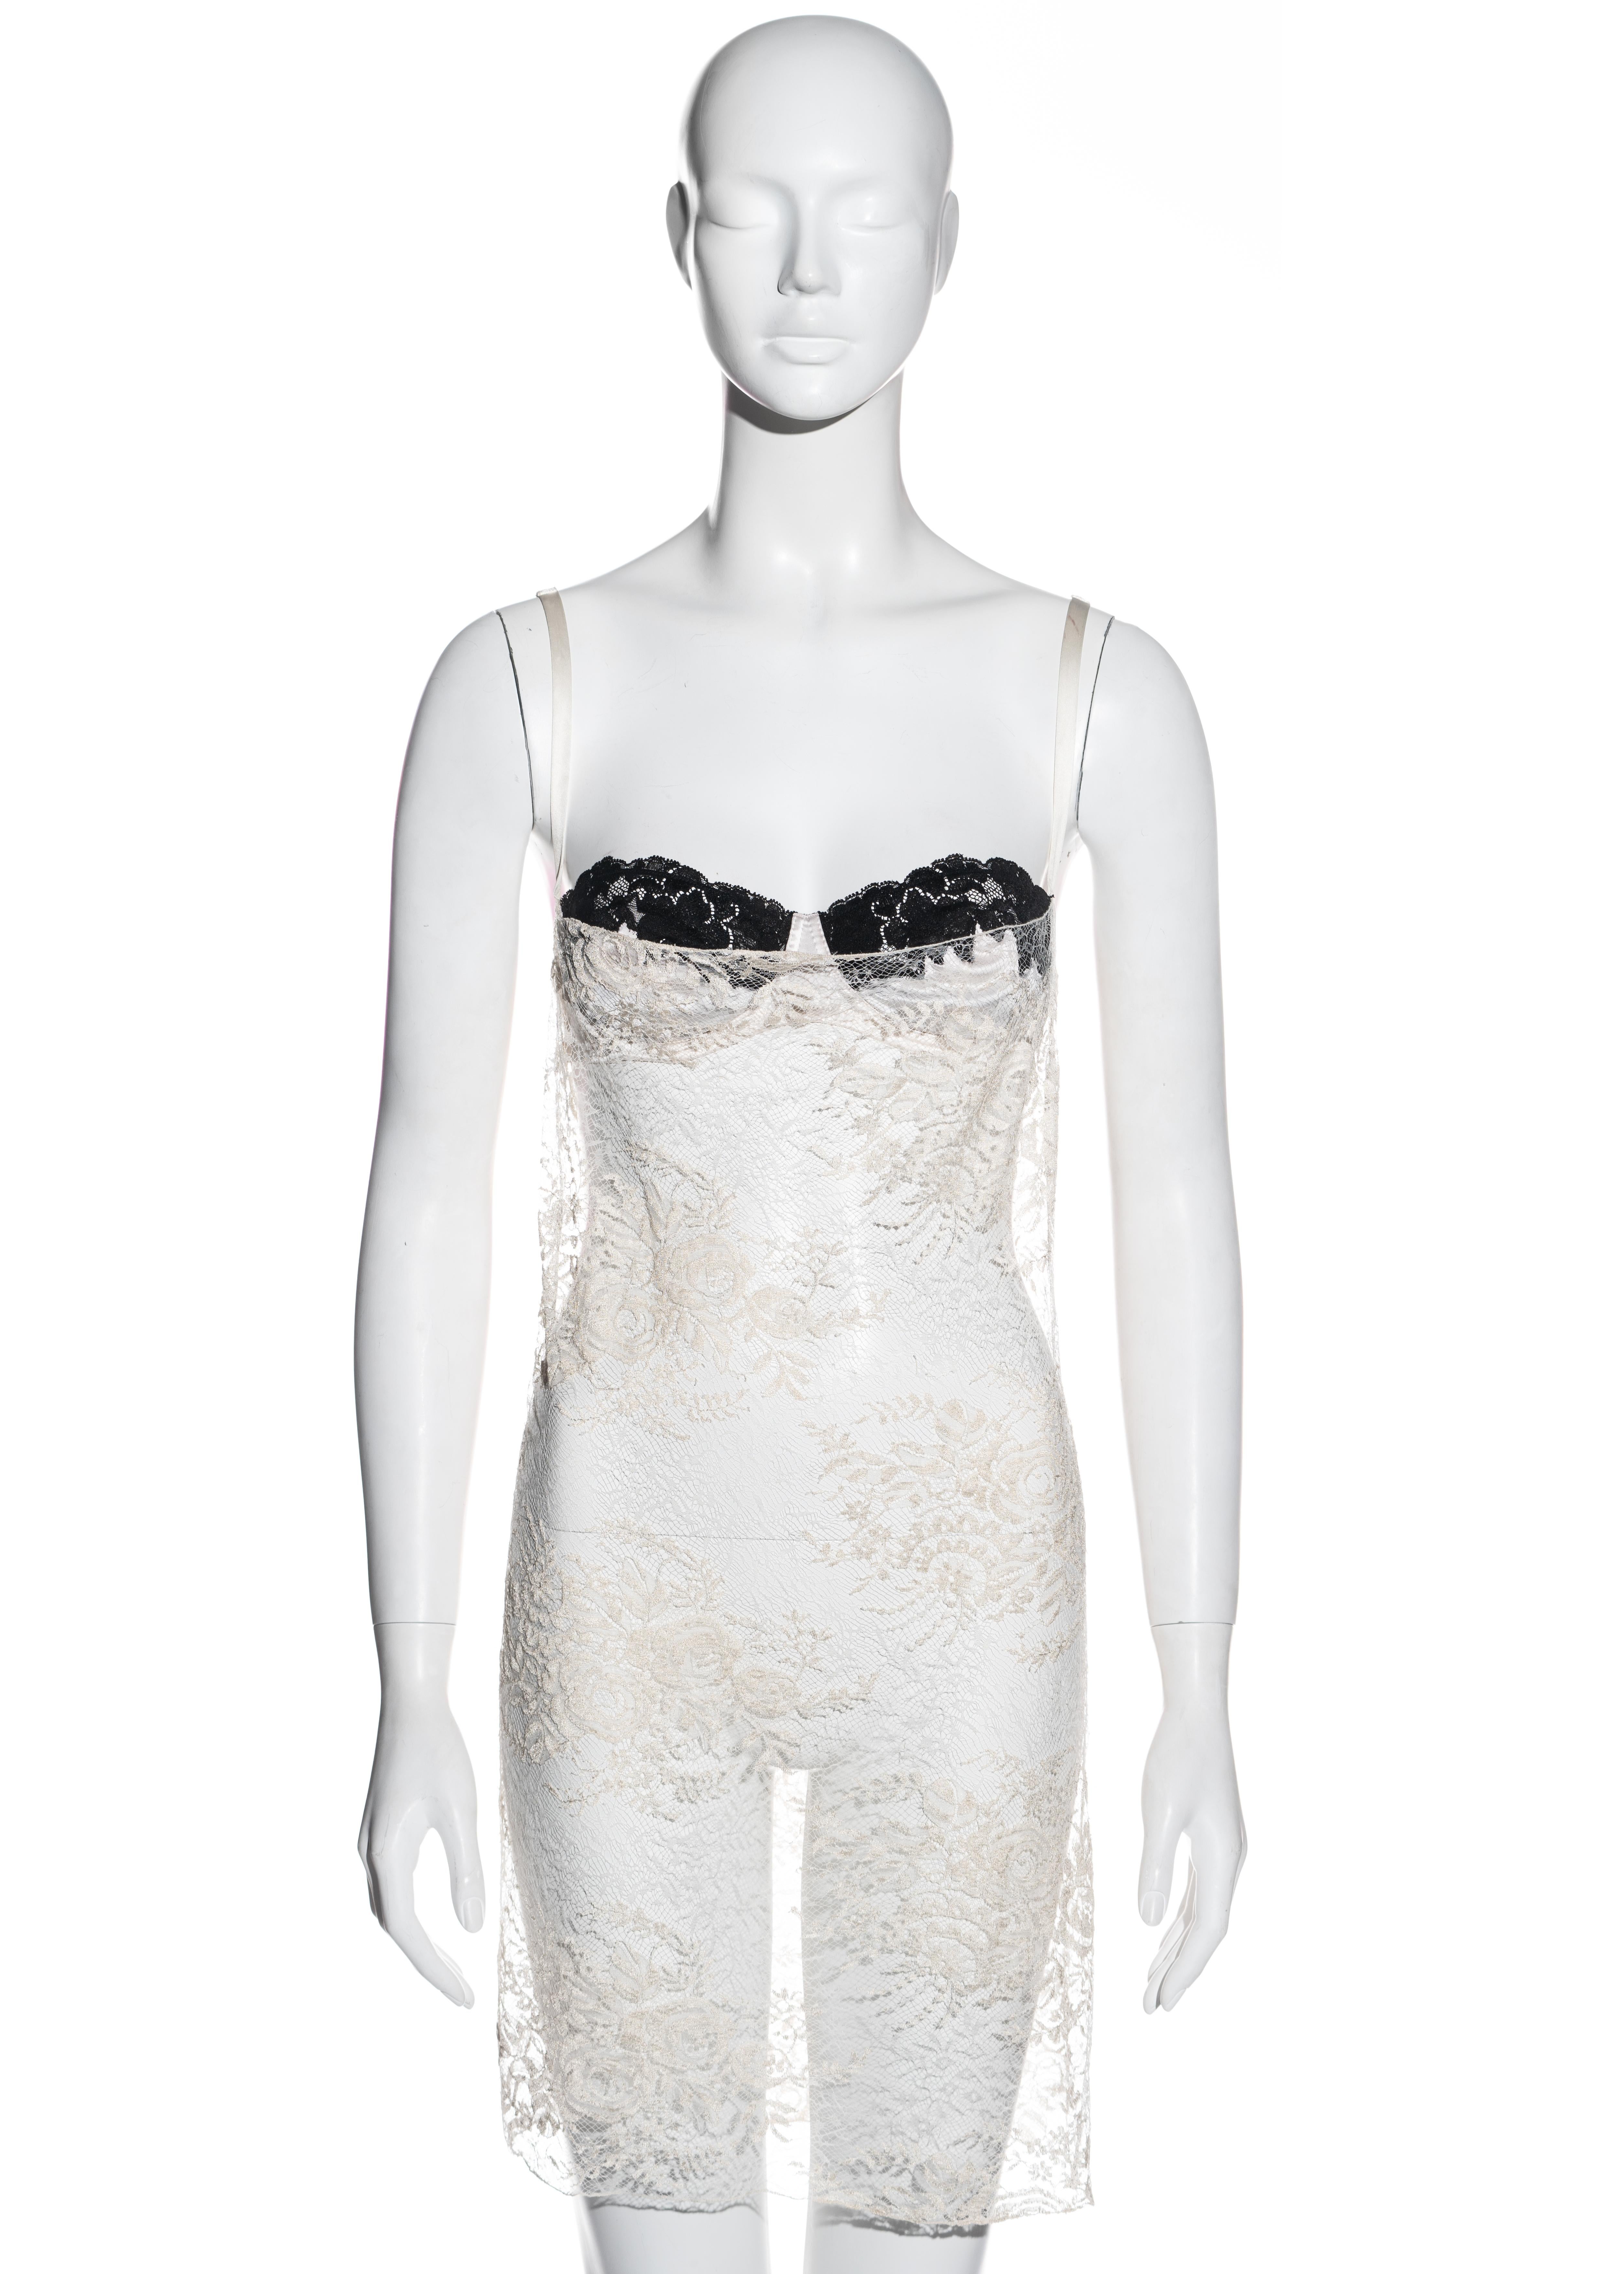 ▪ Dolce & Gabbana ivory lace slip dress
▪ 90% Rayon, 10% Nylon
▪ Attached satin bra edged with black lace 
▪ Invisible side zip fastening 
▪ IT 42 - FR 38 - UK 10 - US 6
▪ Fall-Winter 2001